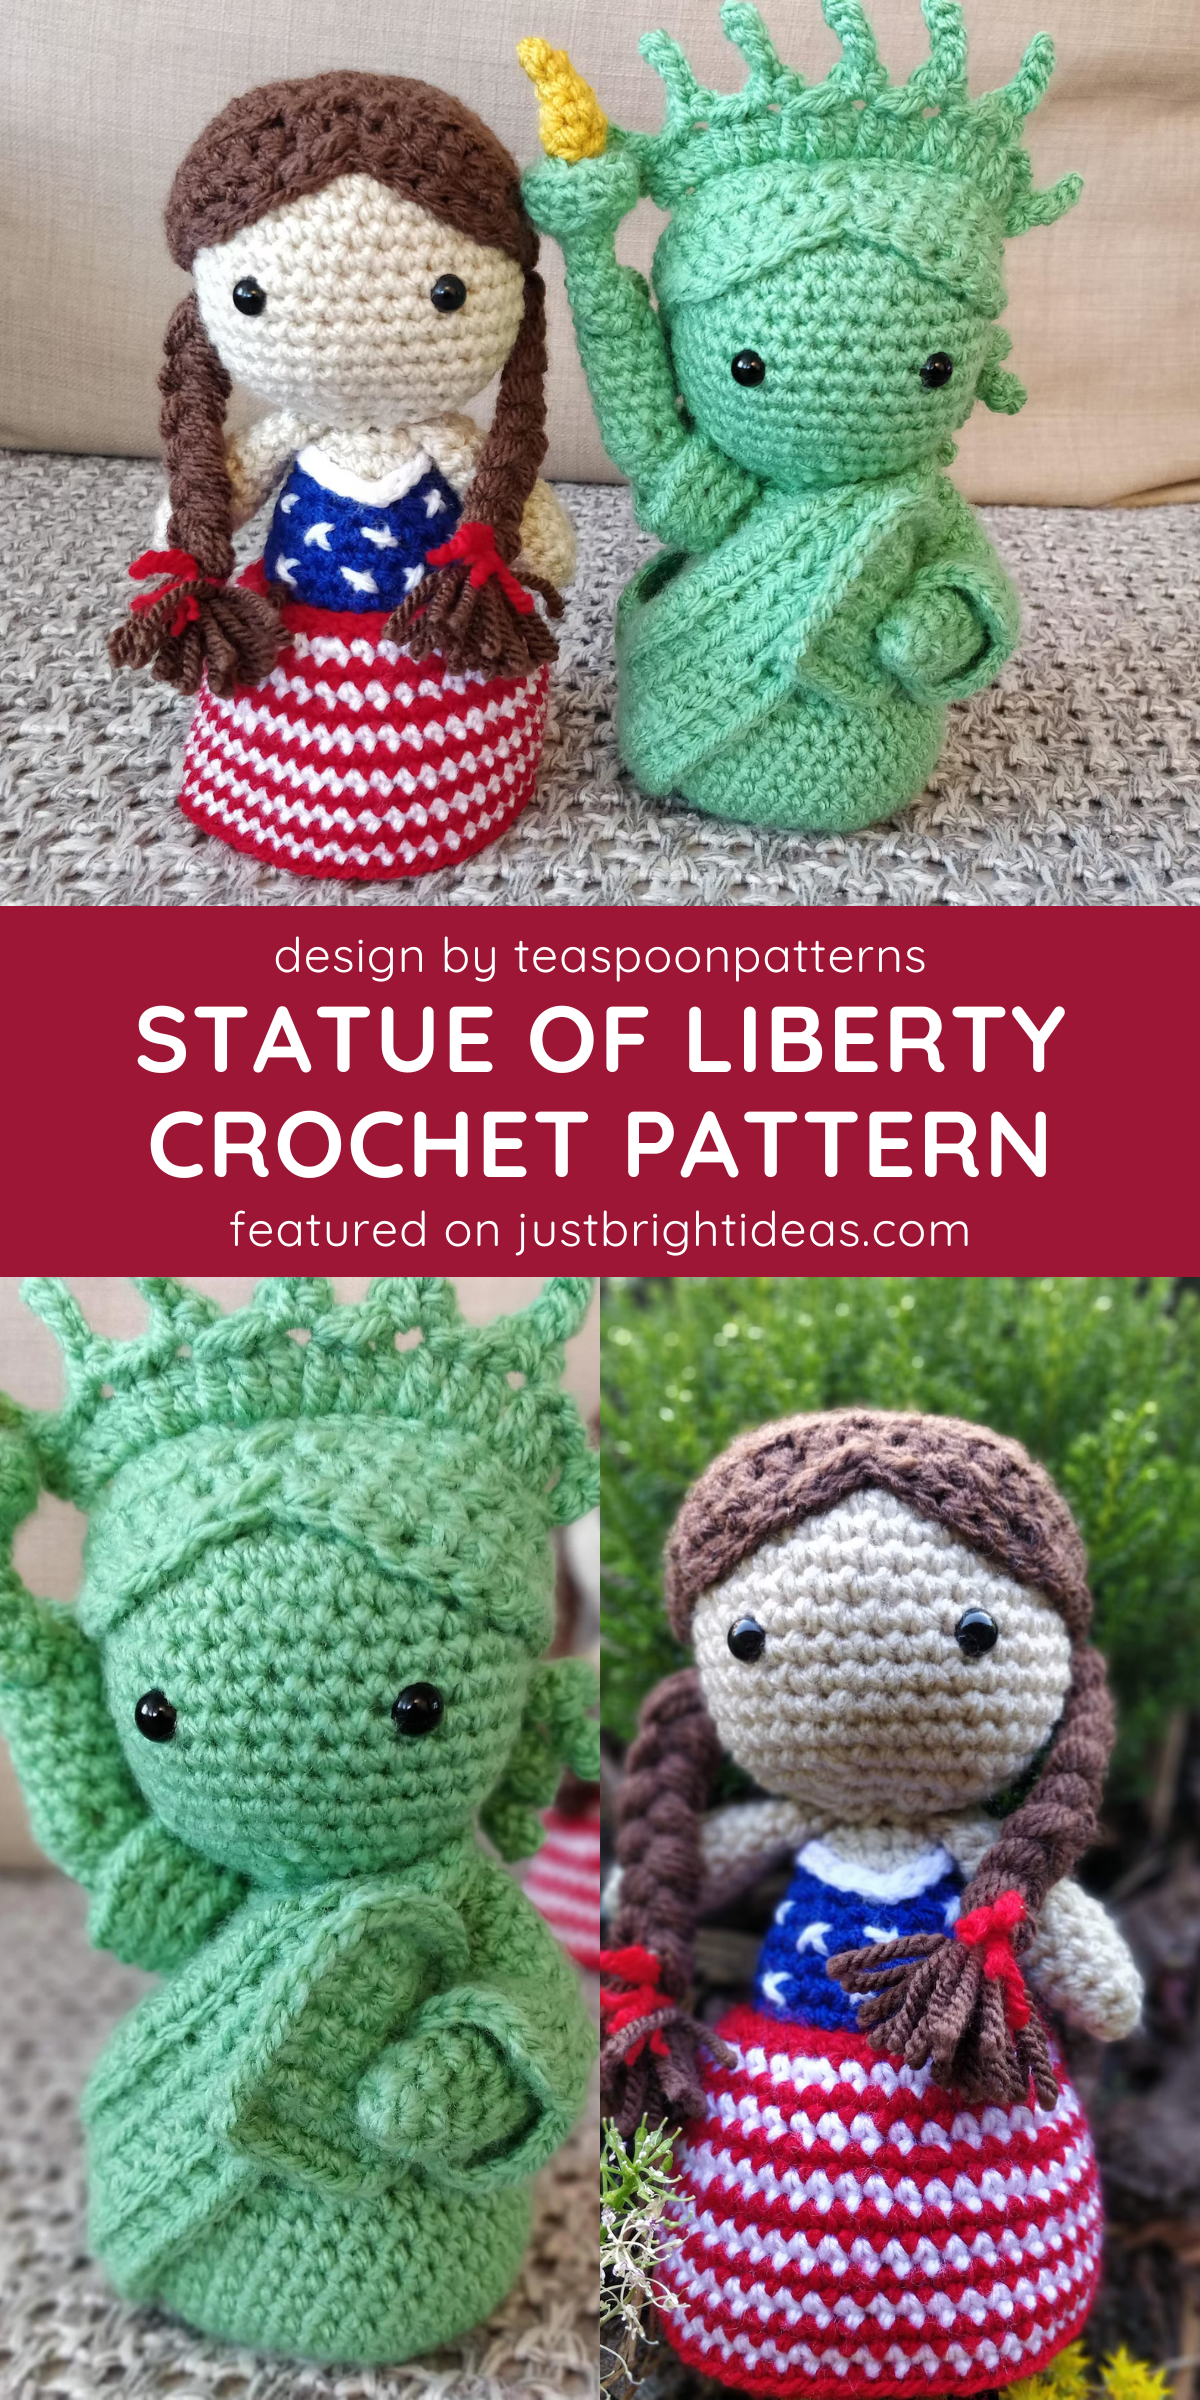 🗽❤️ "Craft your own mini Lady Liberty with this charming amigurumi pattern! A perfect way to celebrate Independence Day and showcase your crochet skills." 🧵🇺🇸
👀 Visit our post for the full pattern! 🔗